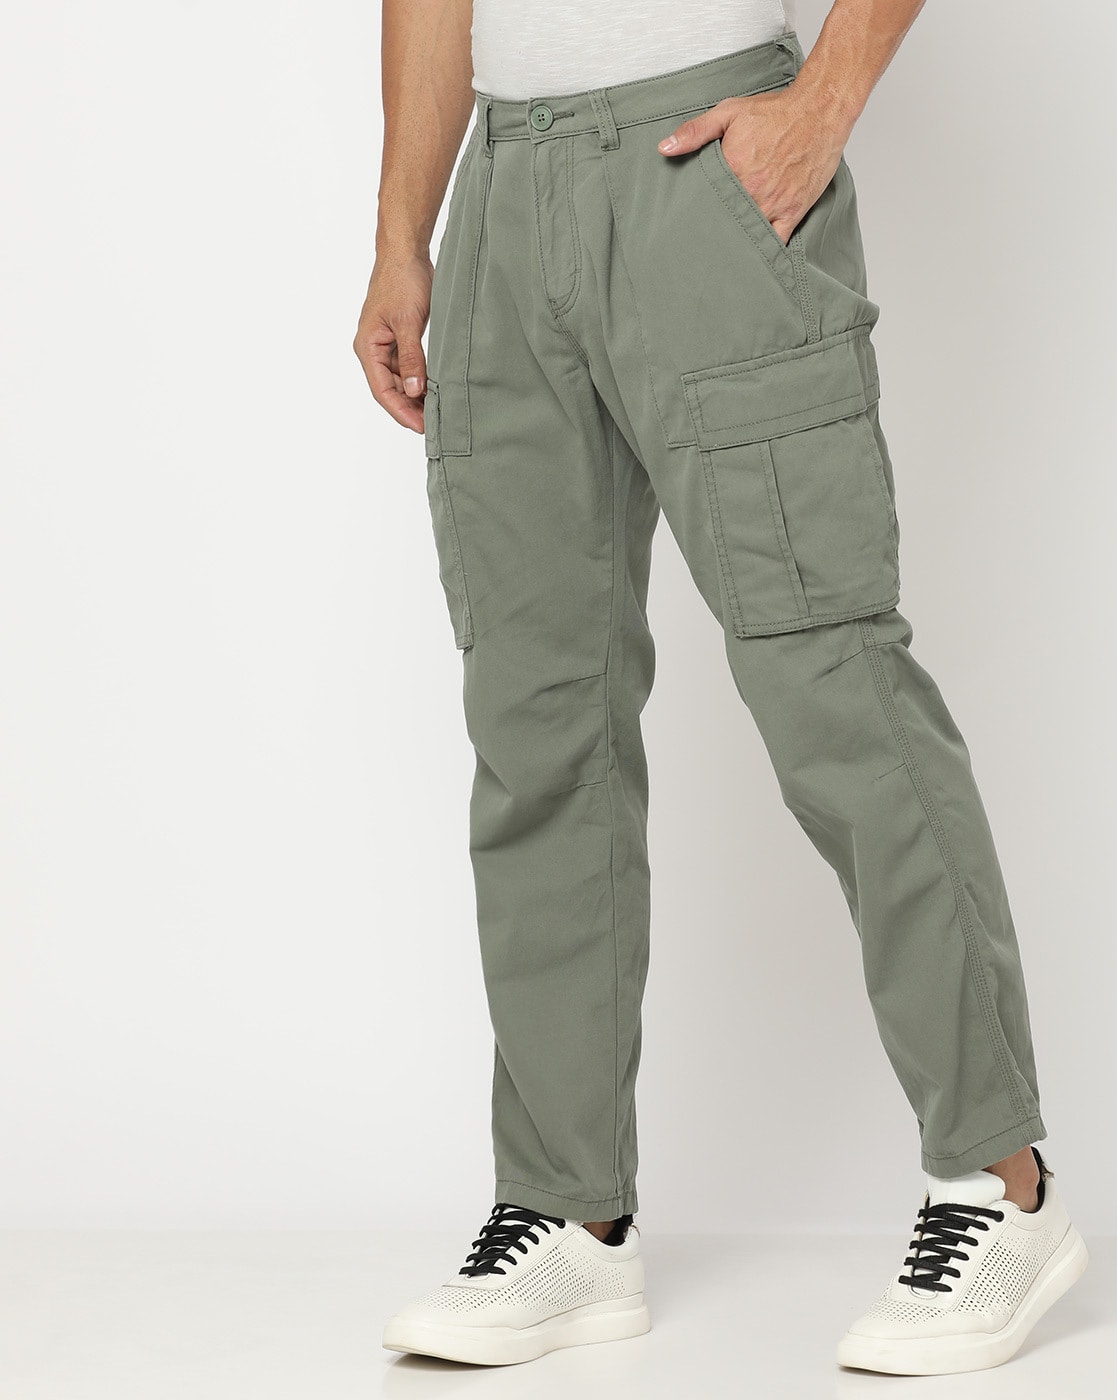 Buy Cream Trousers & Pants for Men by MAX Online | Ajio.com